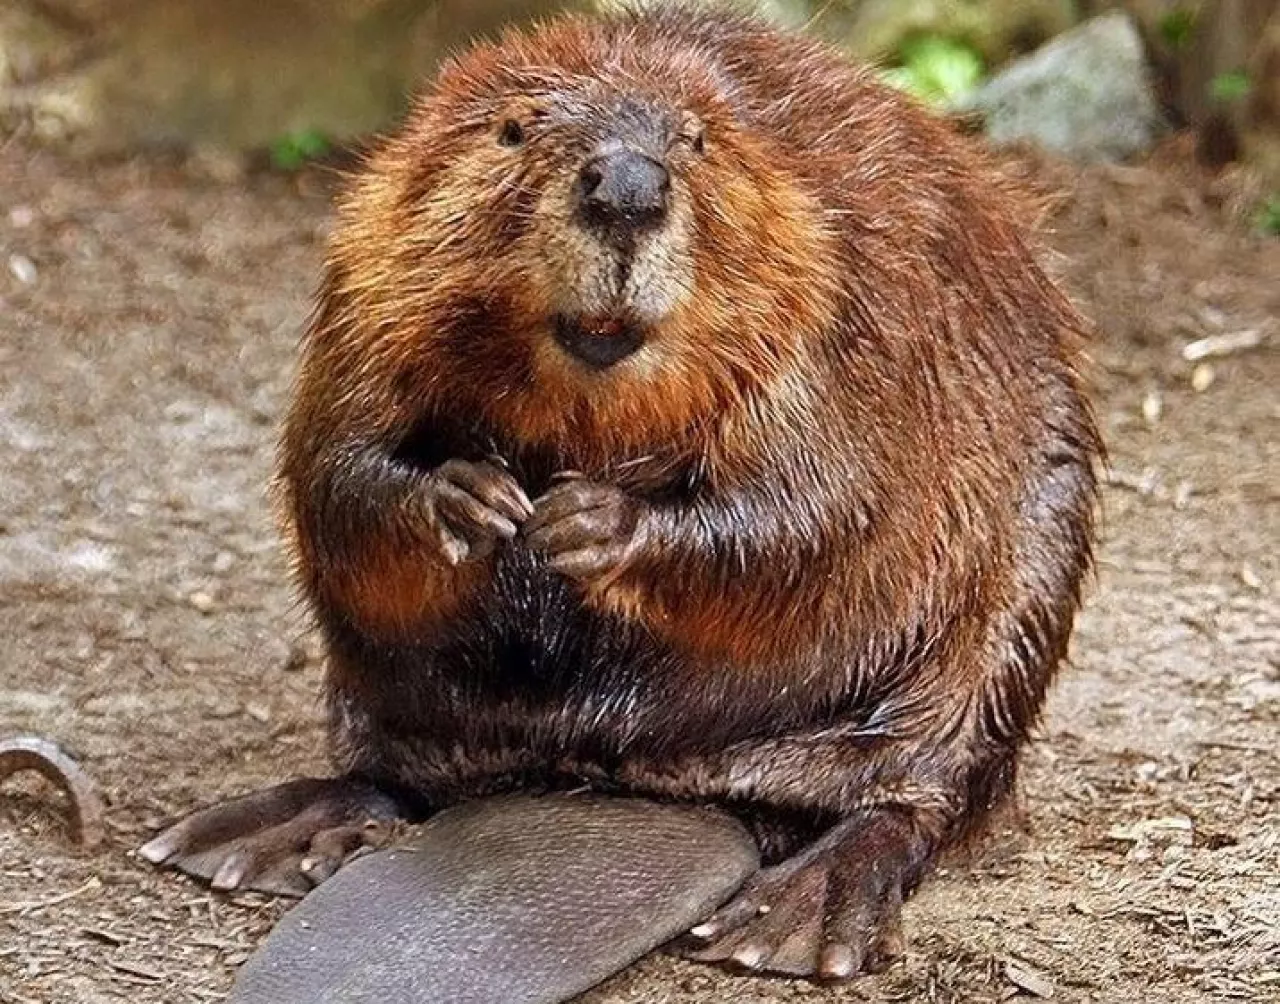 (By Steve from washington, dc, usa - American Beaver, CC BY-SA 2.0, https://commons.wikimedia.org/w/index.php?curid=3963858)